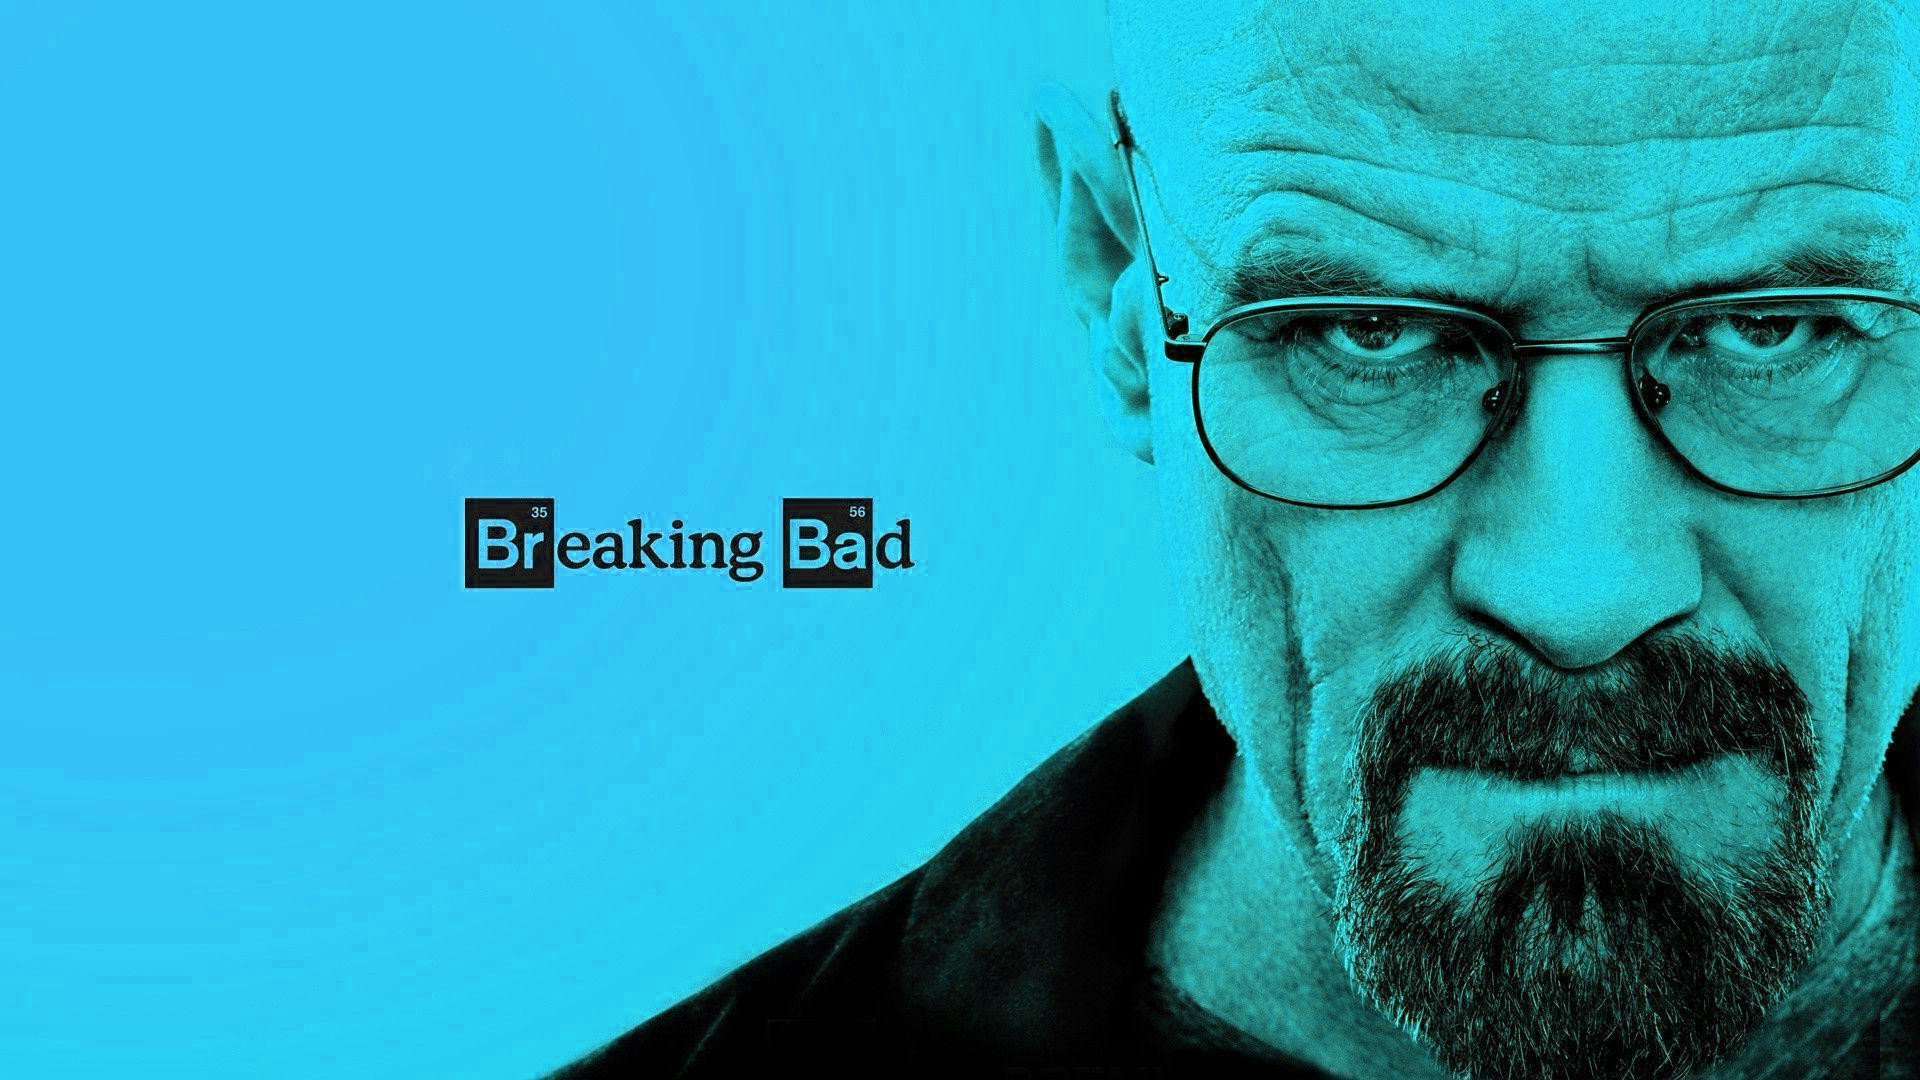 546273 breaking bad, tv shows, hd, 4k - Rare Gallery HD Wallpapers